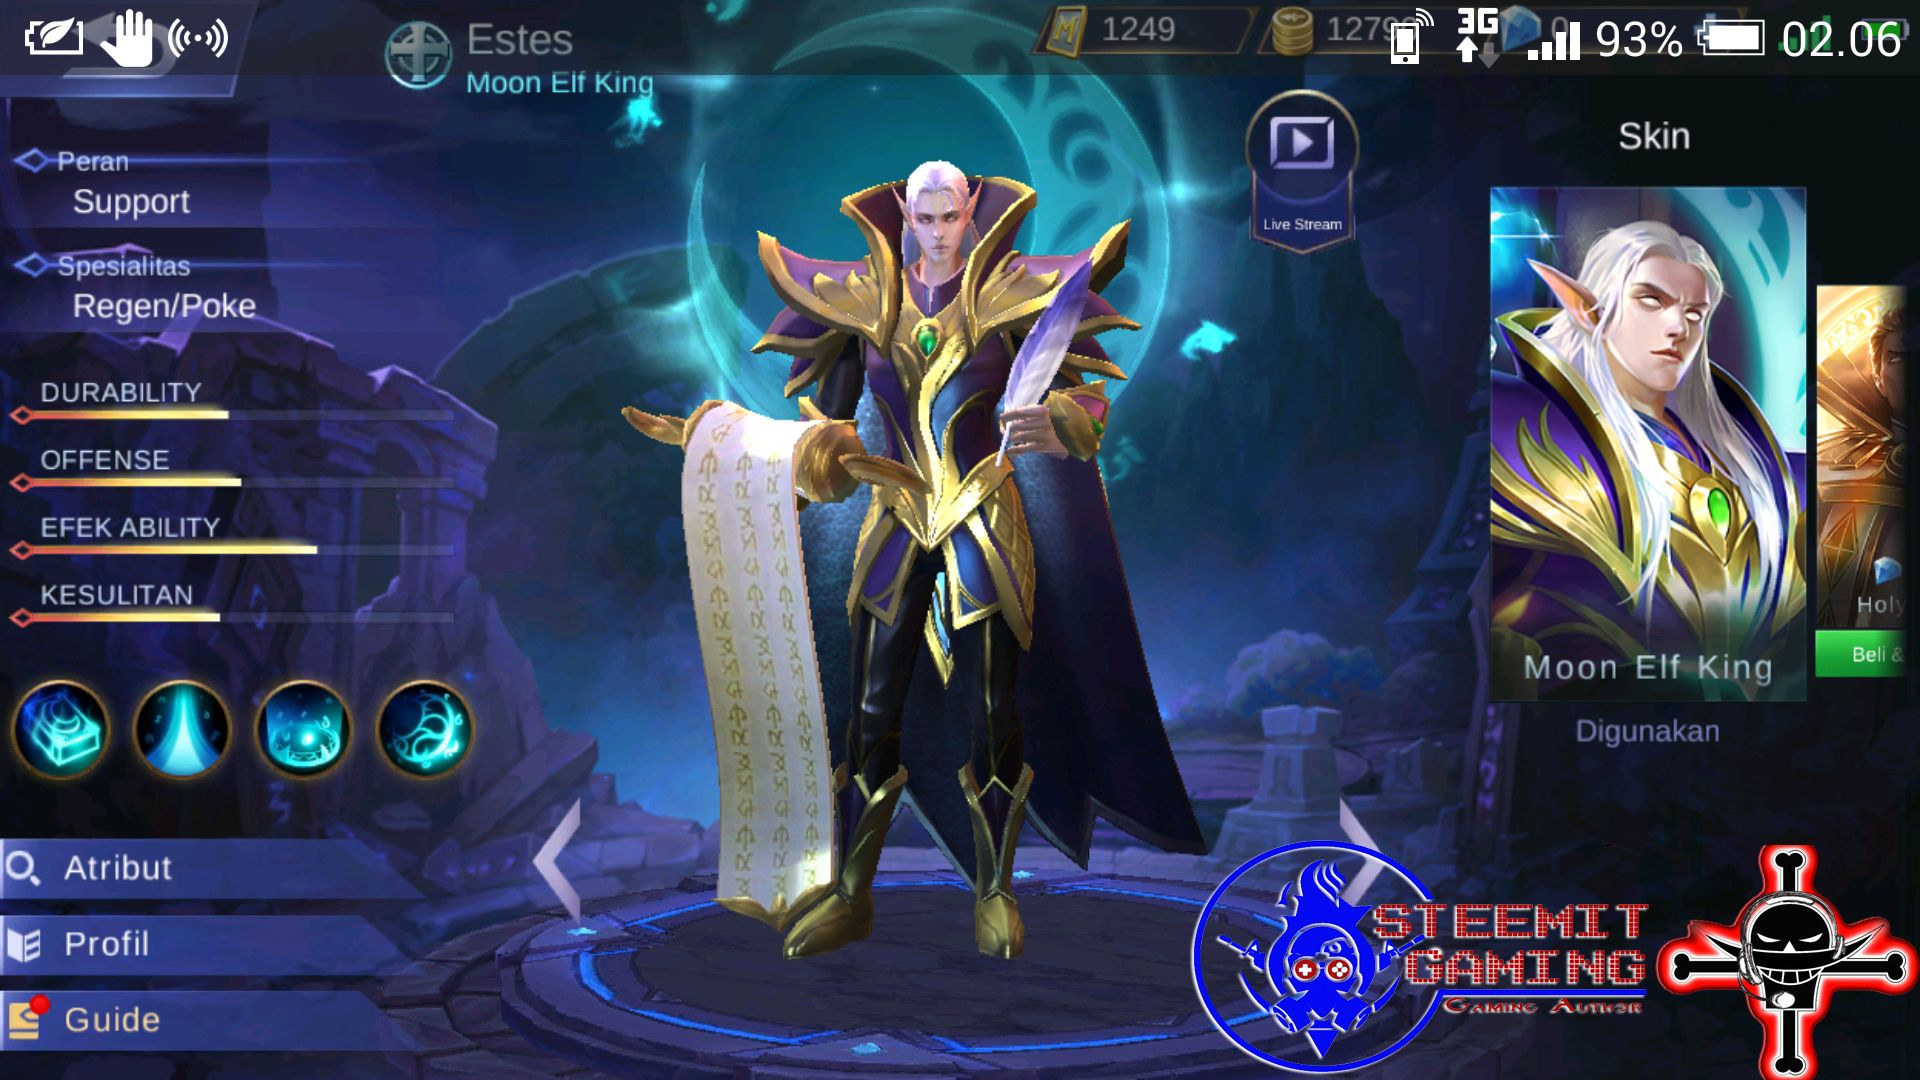 How to play Hero Estes get LEGENDARY in mobile Legends game by me  @tanzilalmubarak #1 — Steemit